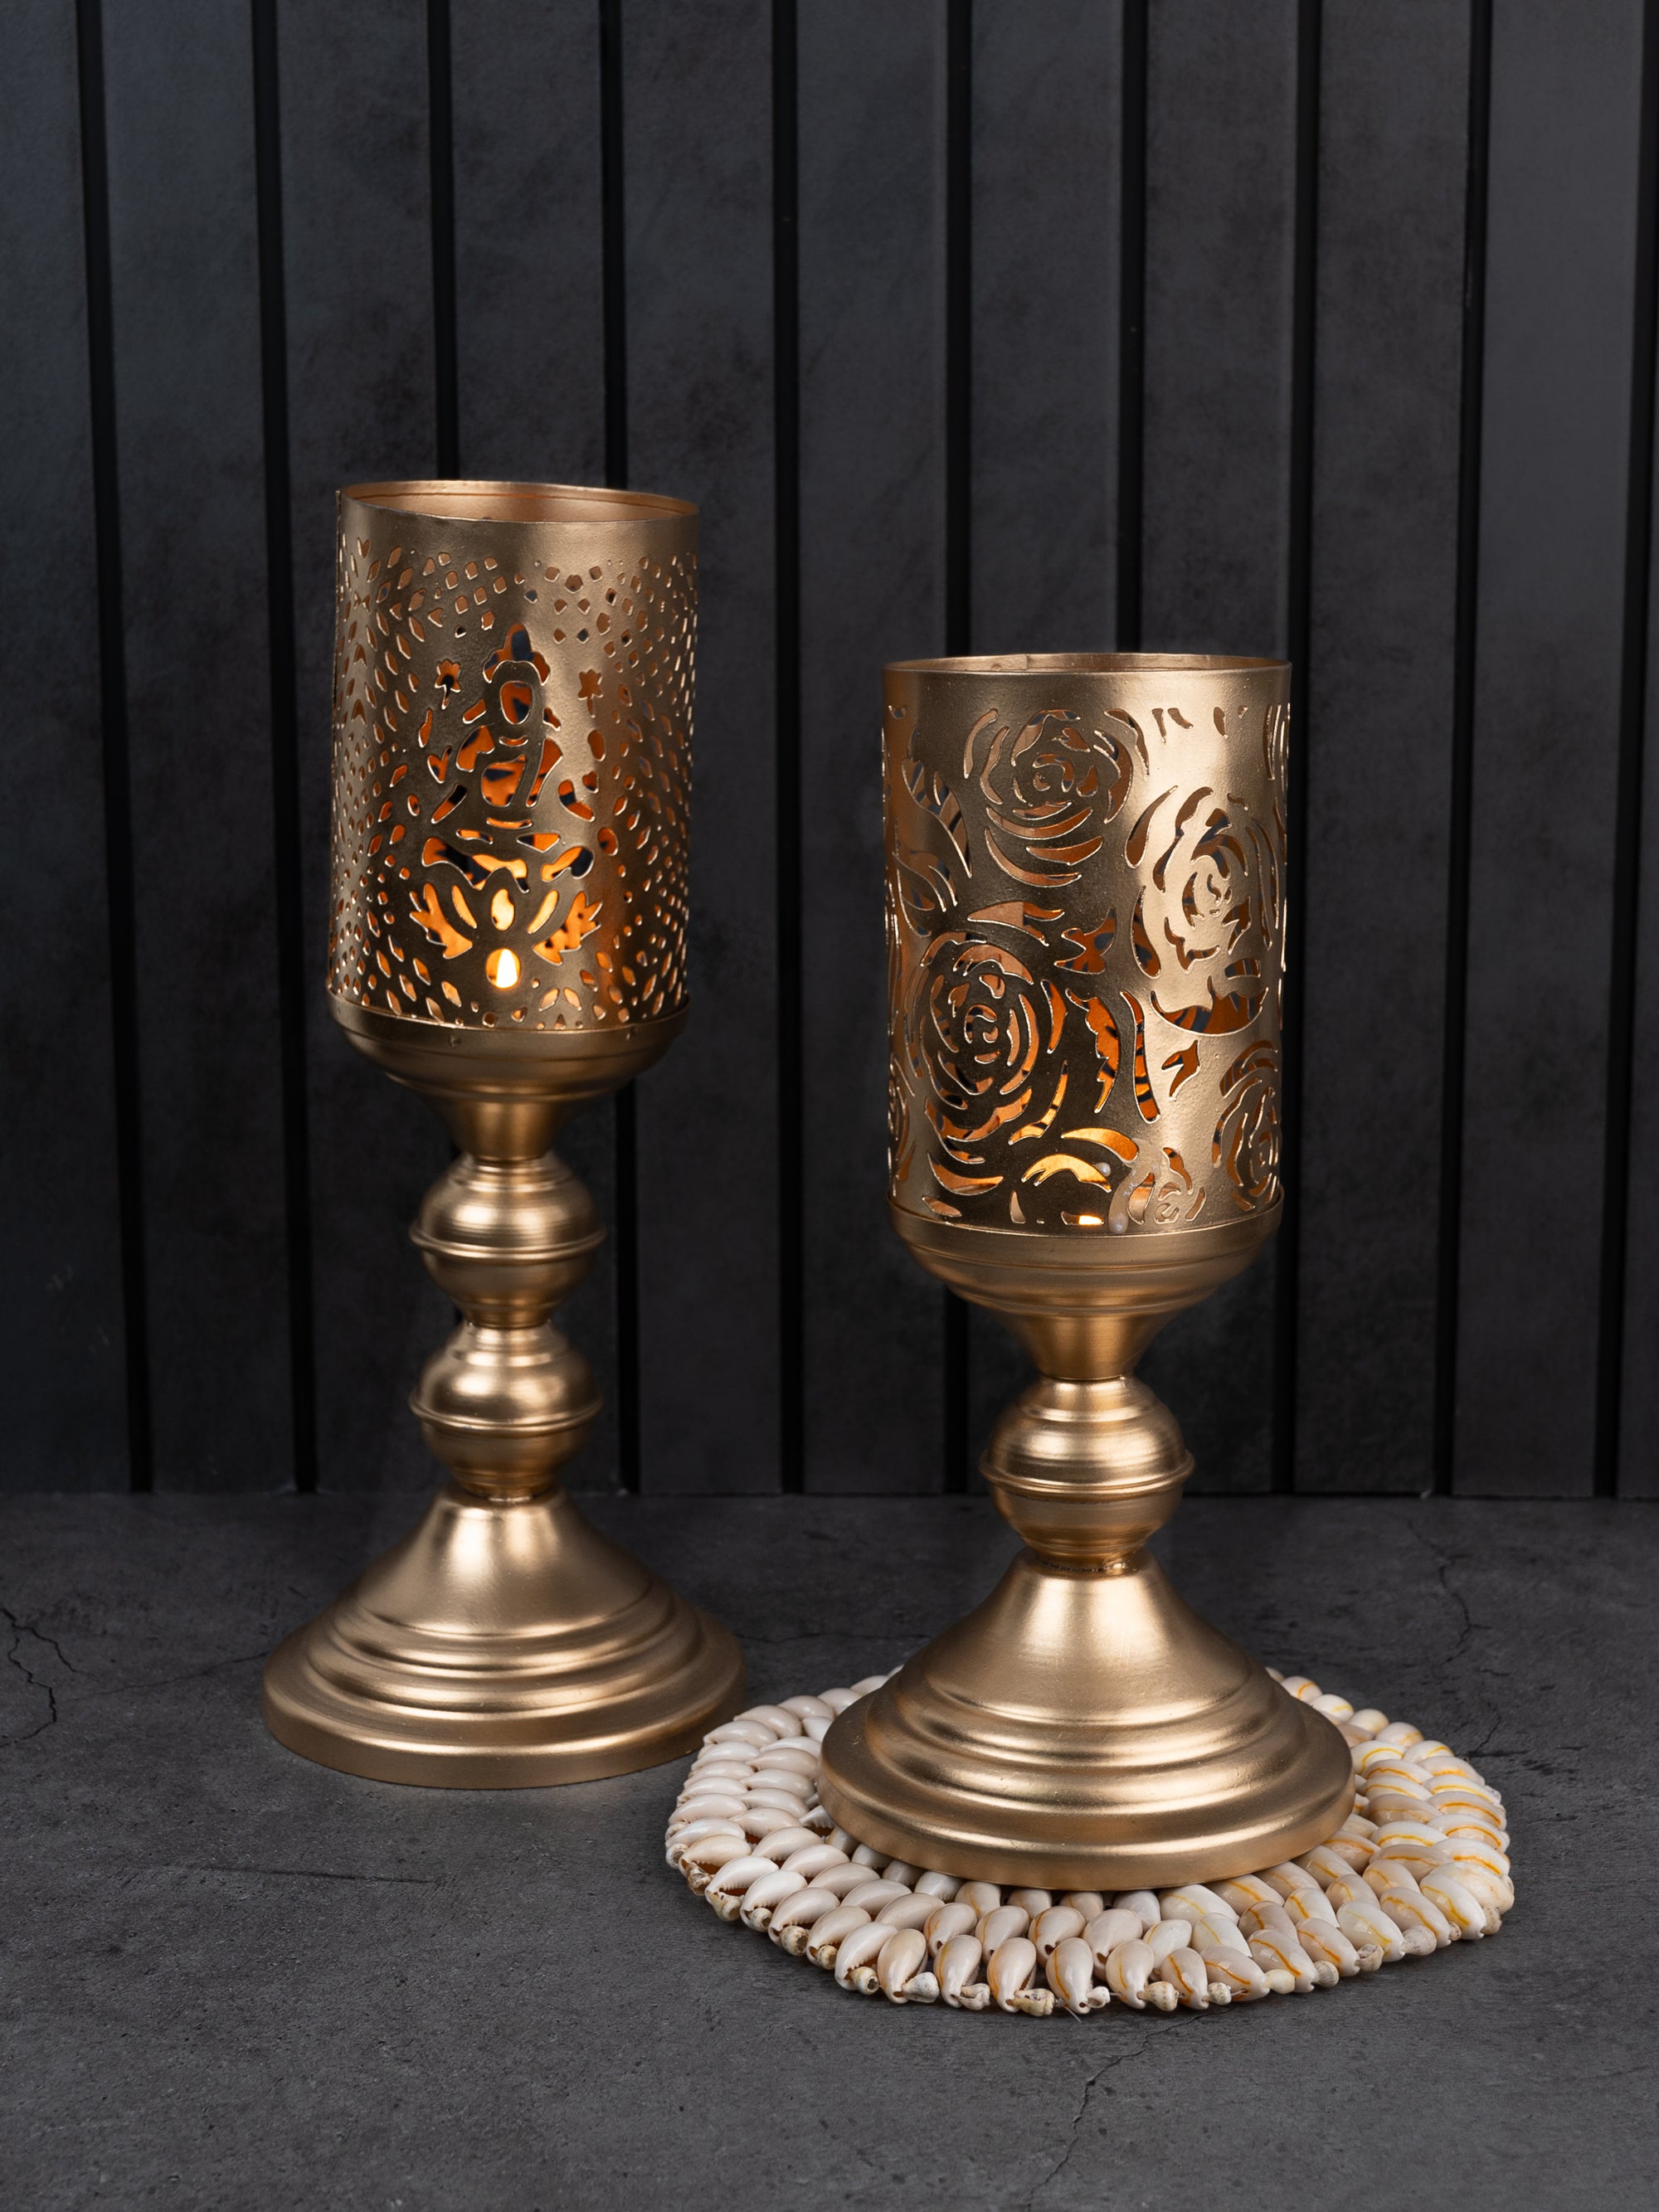 Set of 2 Cylindrical Metal Candle Holders with Cutwork design on the Body